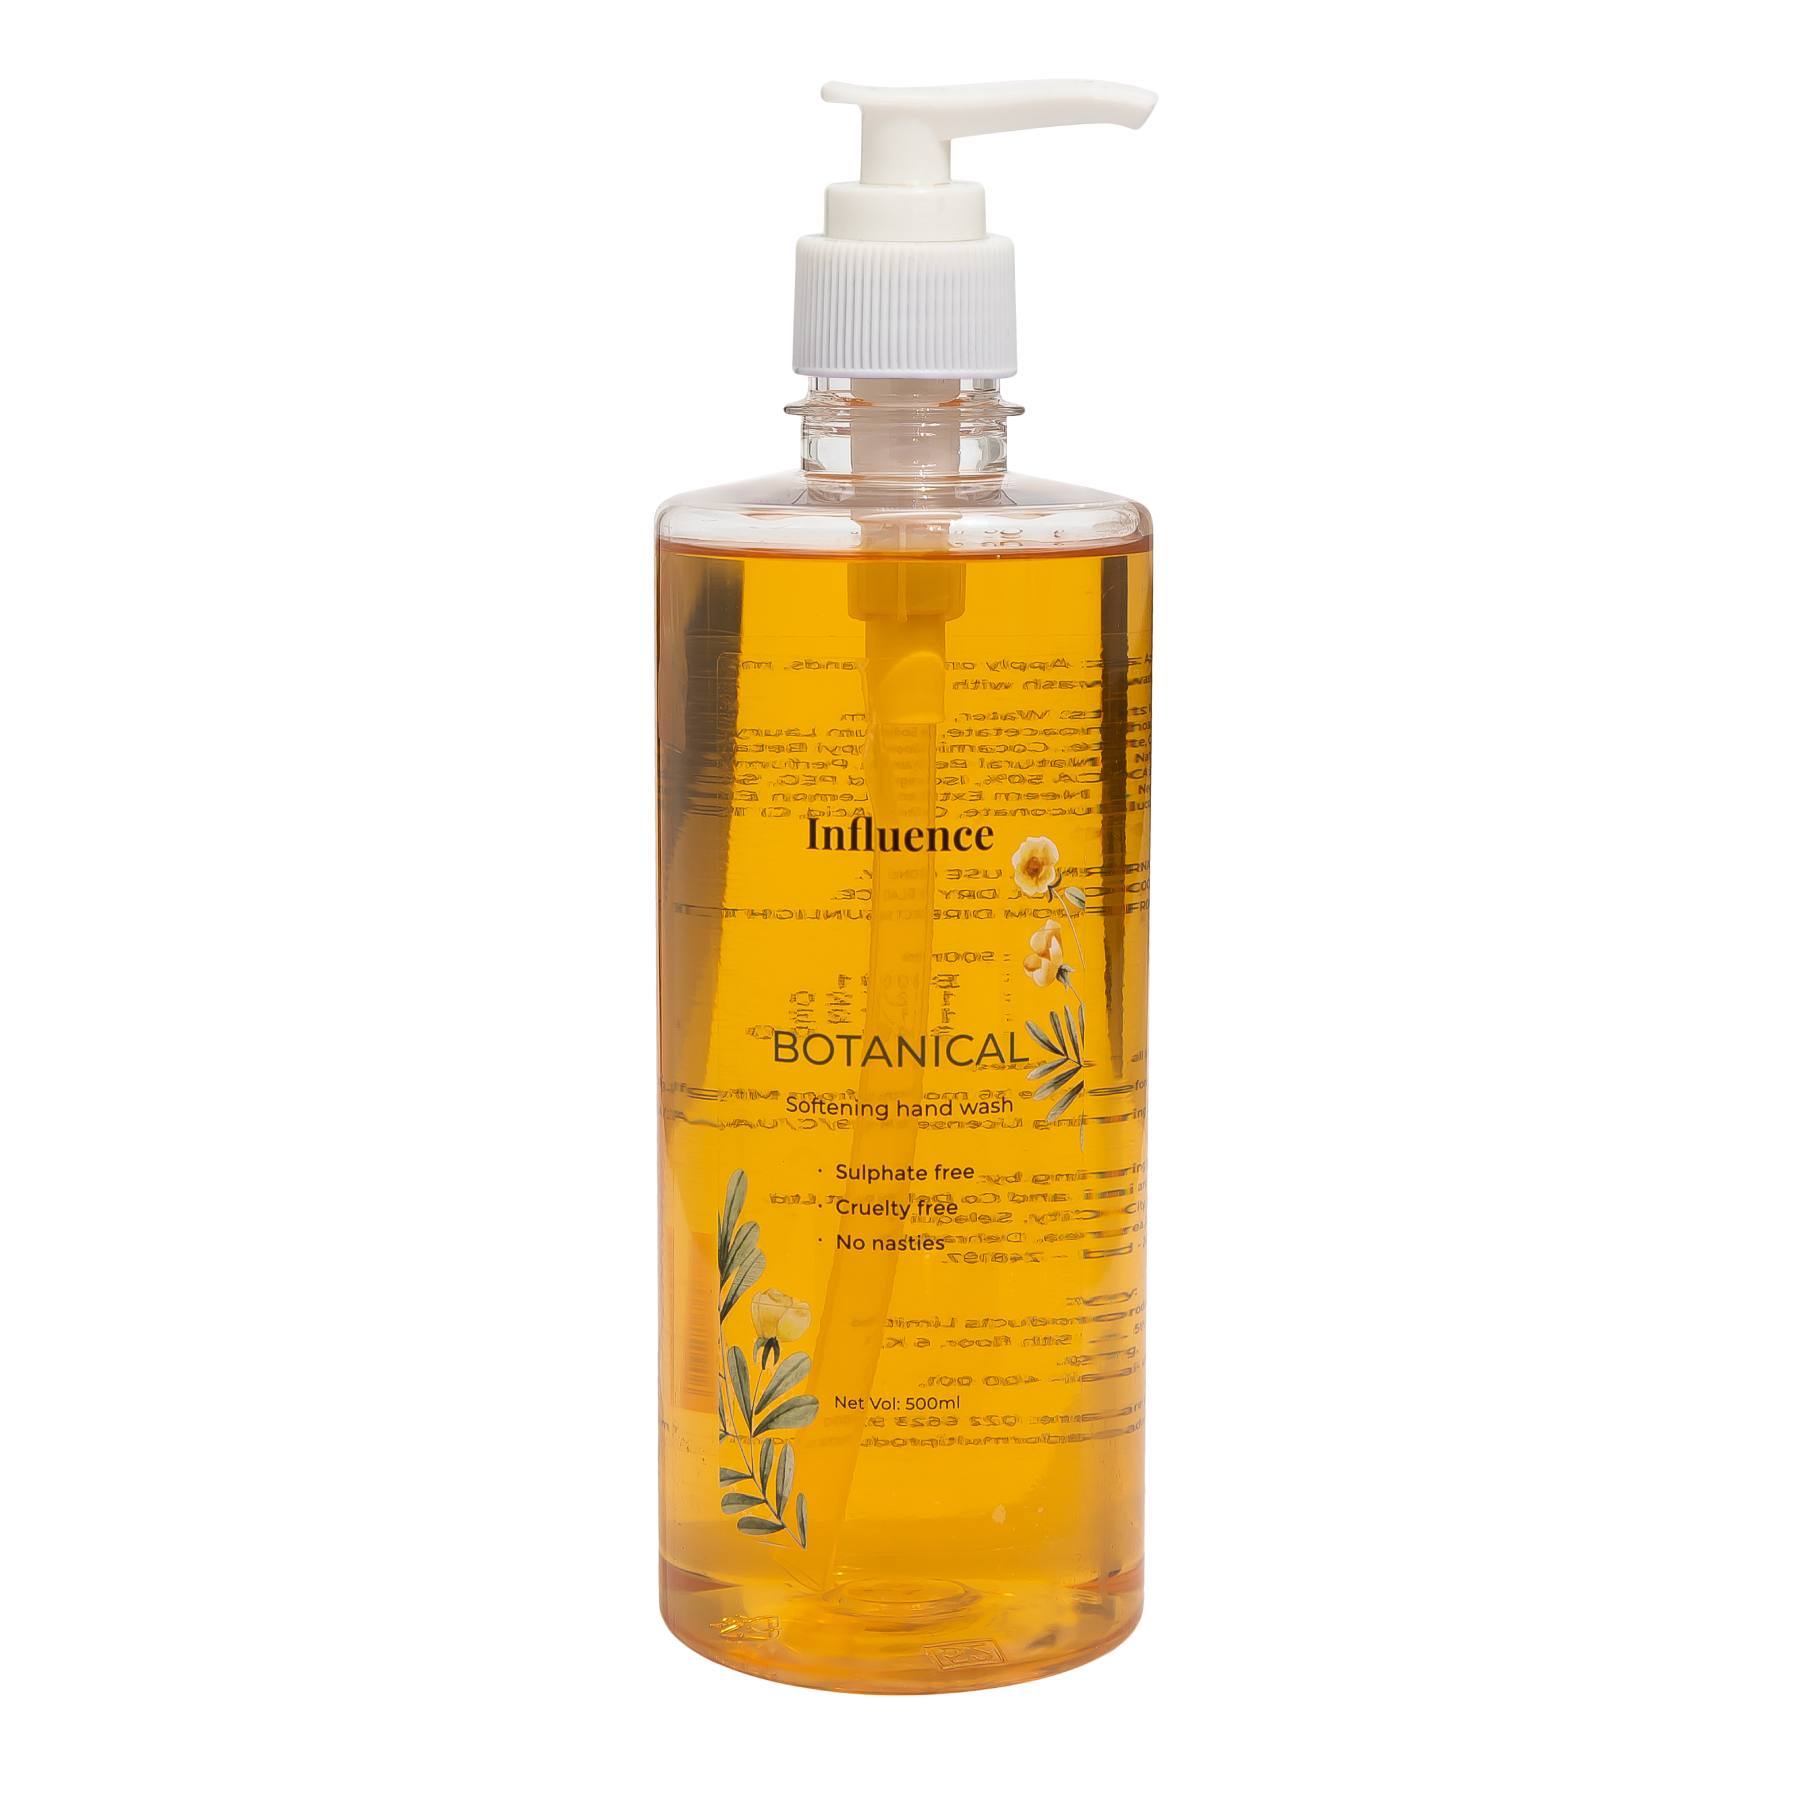 Shop Influence Botanical Hand Wash (500 ml) on Sublime Life. Kills Germs and Keeps your Hands Clean